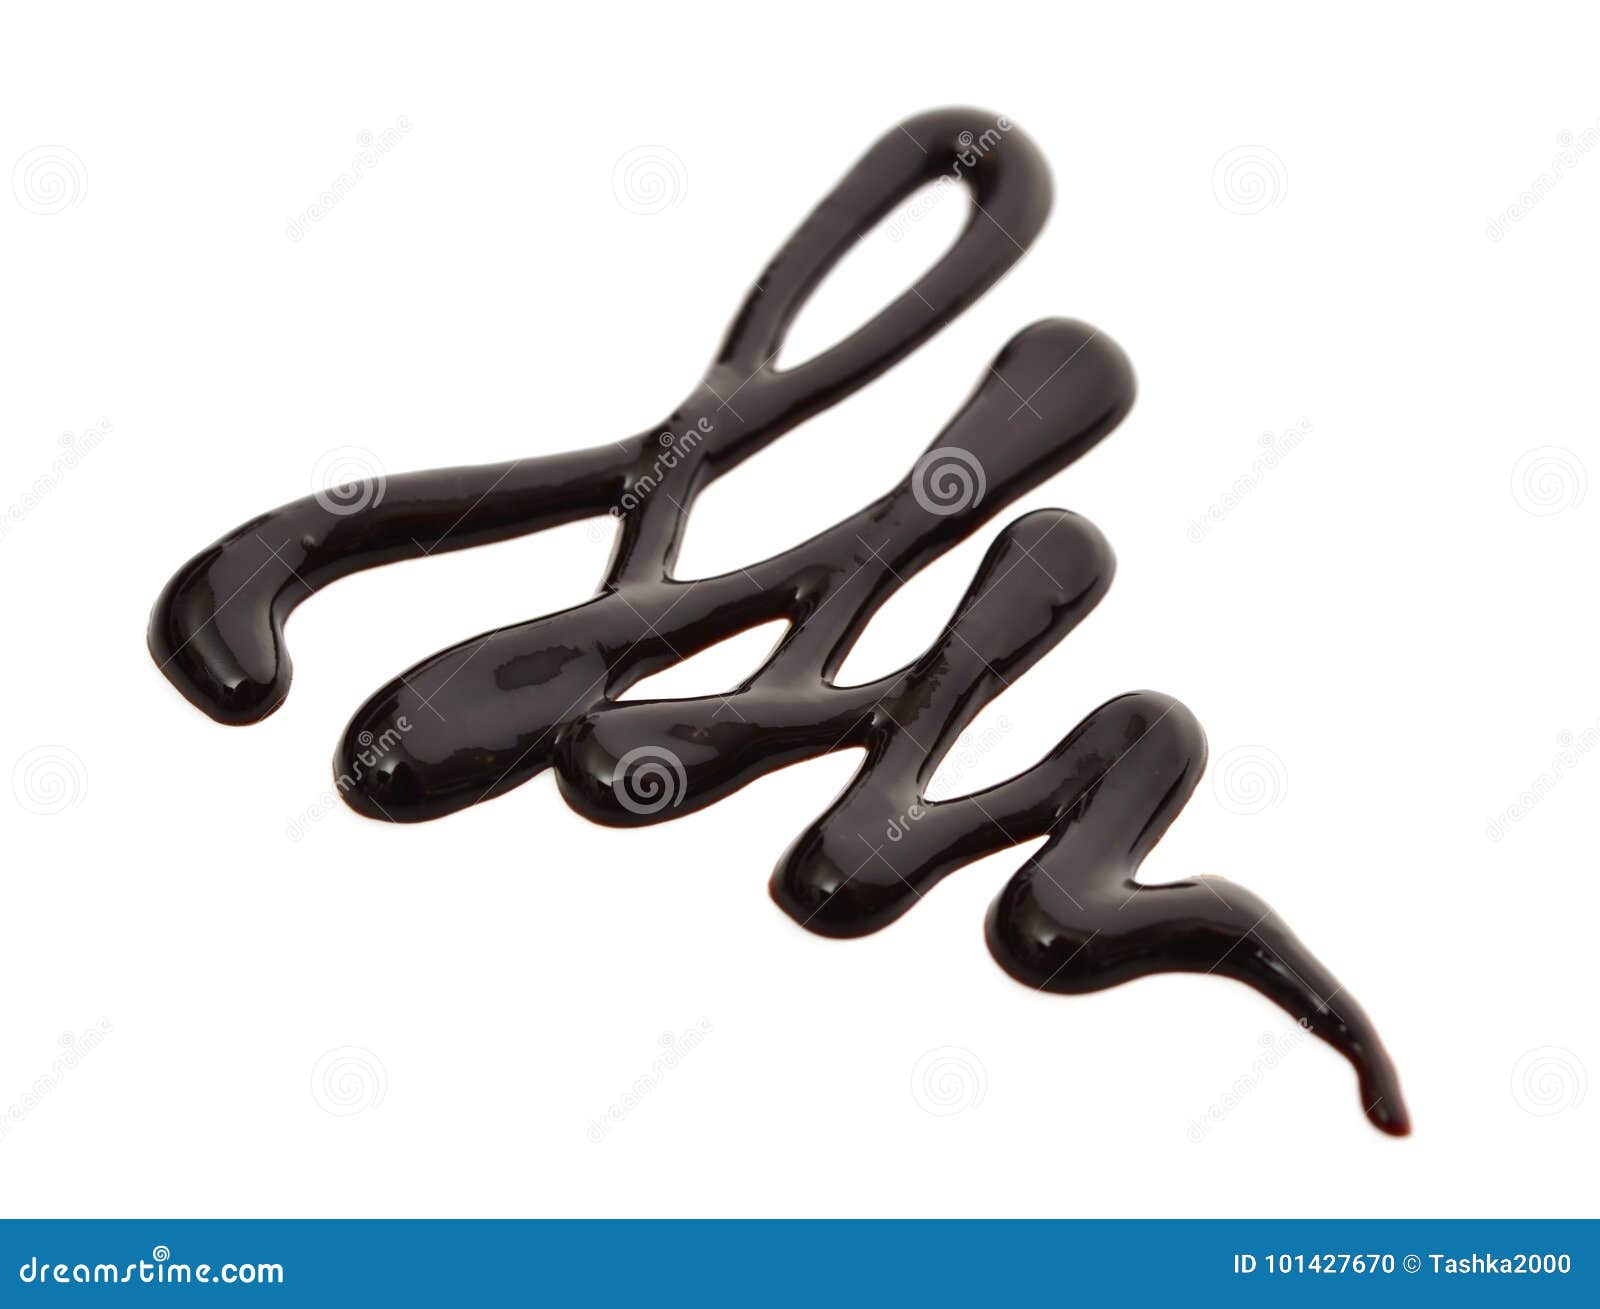 Brush and Stroke of Chocolate Syrup on White Background Stock Image - Image  of food, pastry: 174248497